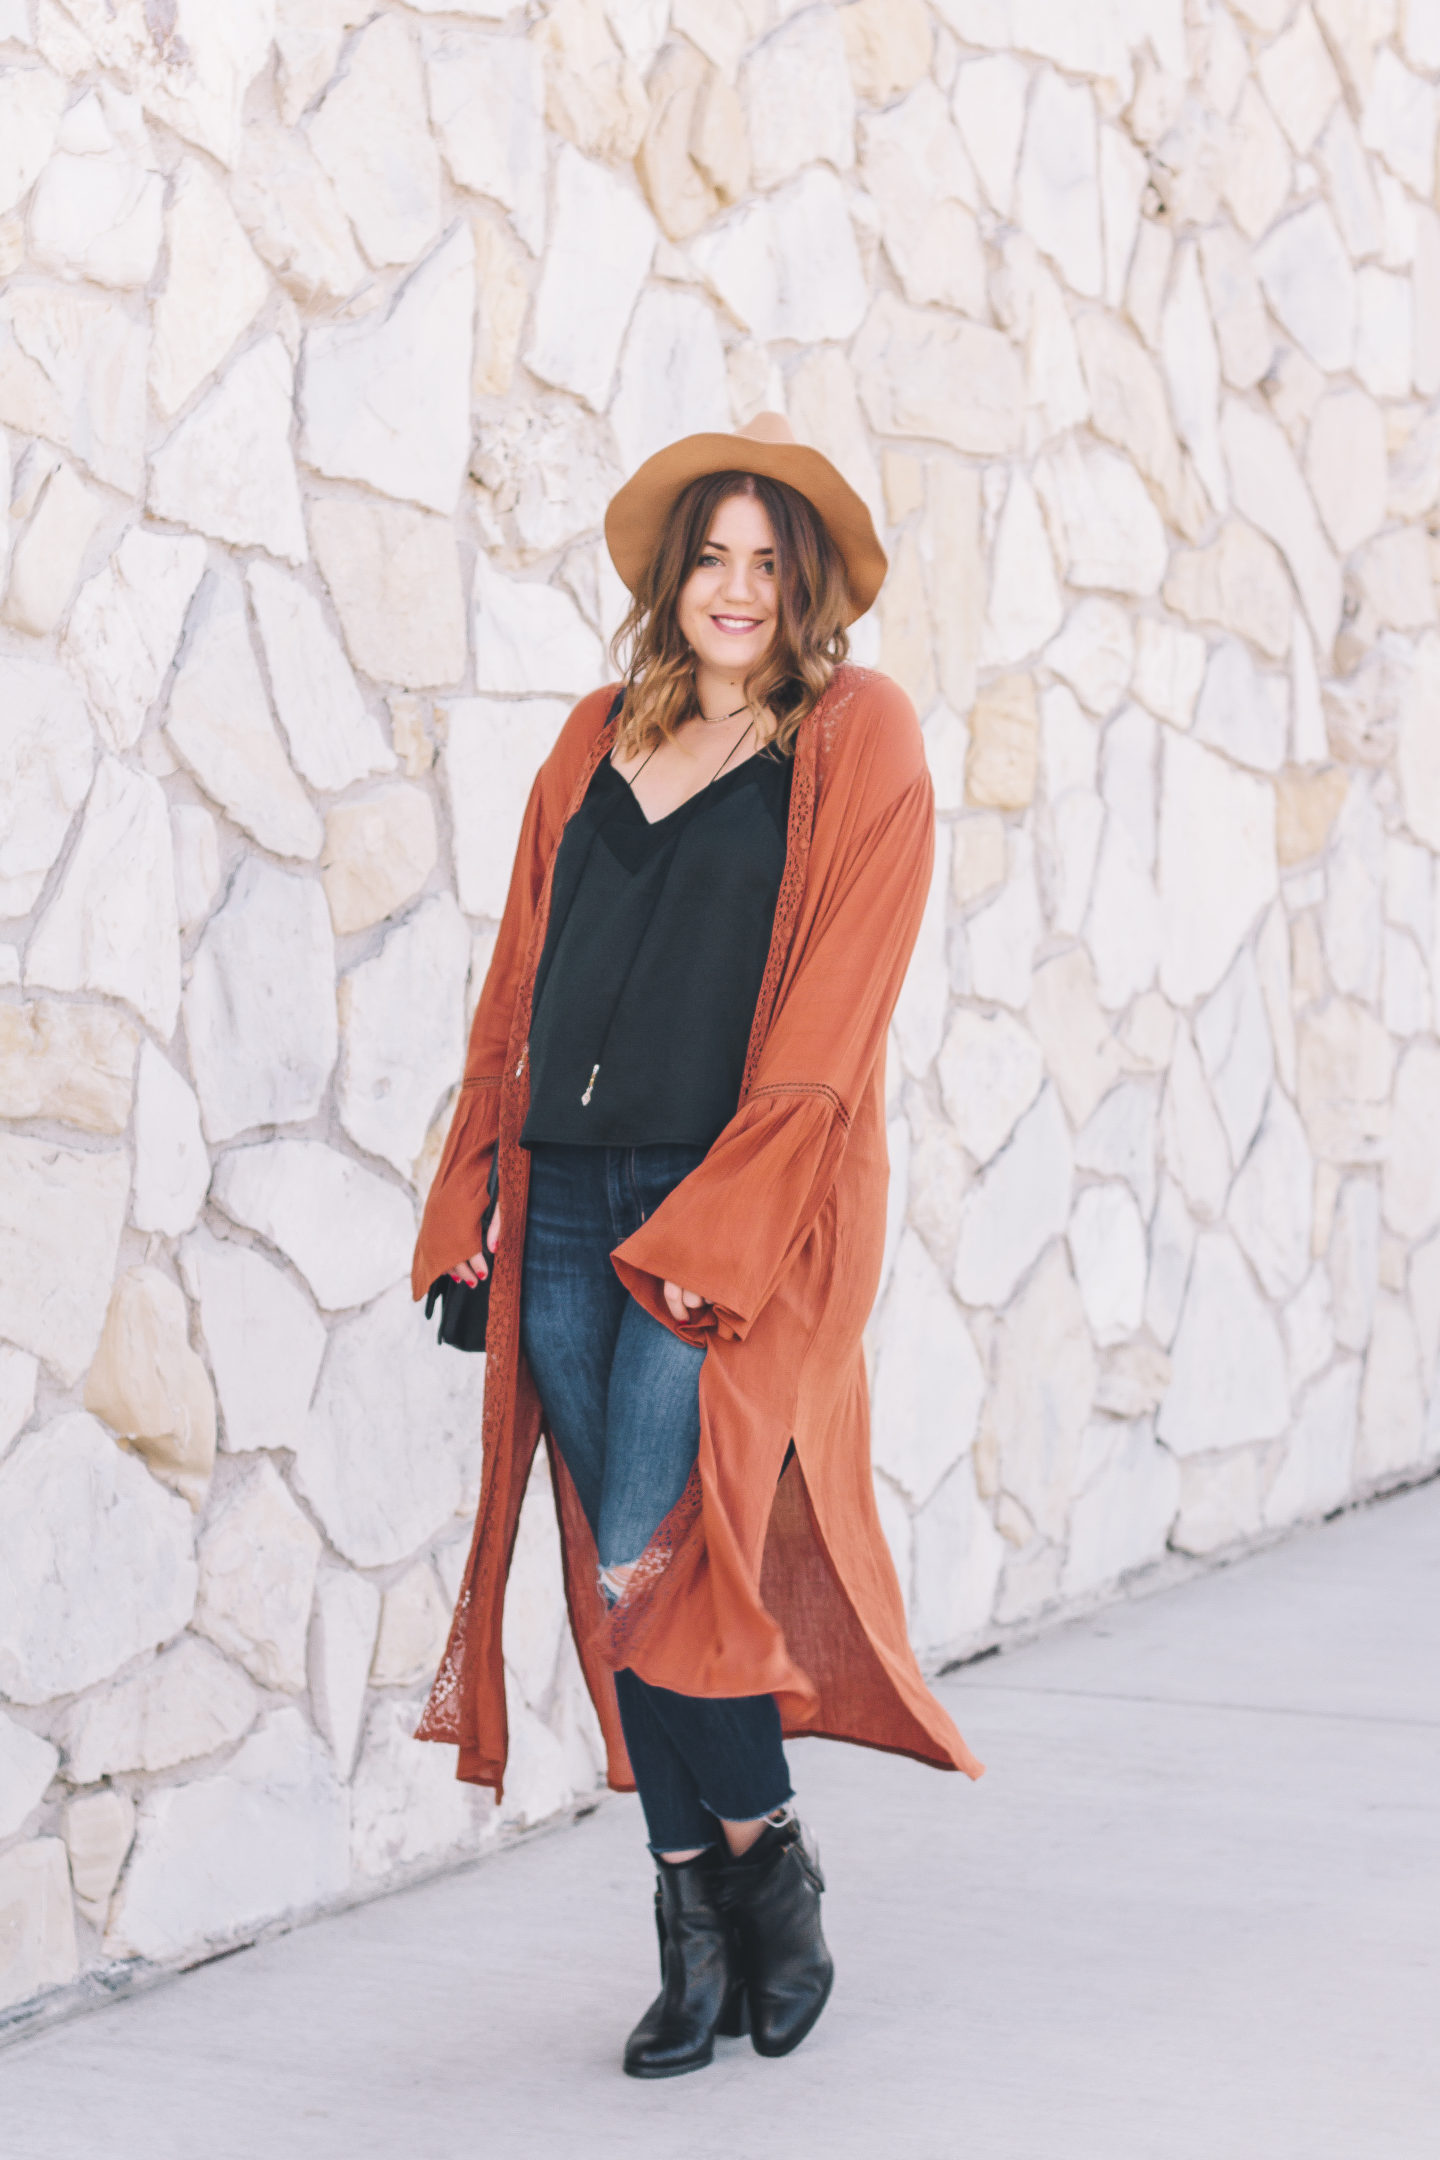 A Thanksgiving Outfit | Rust Duster // www.wanderabode.com